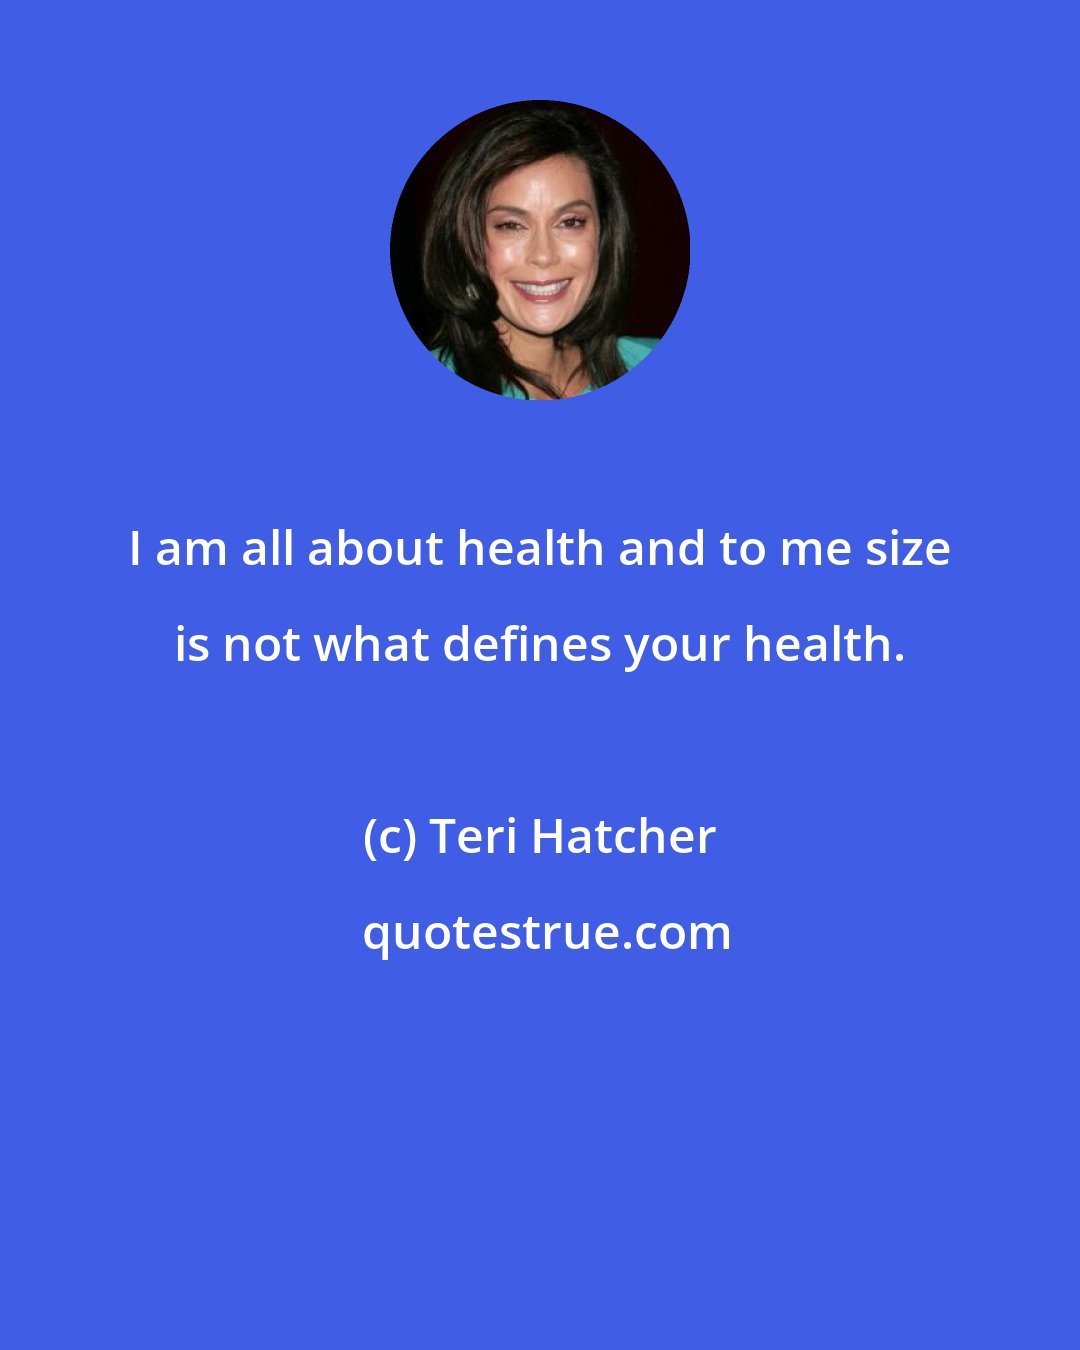 Teri Hatcher: I am all about health and to me size is not what defines your health.